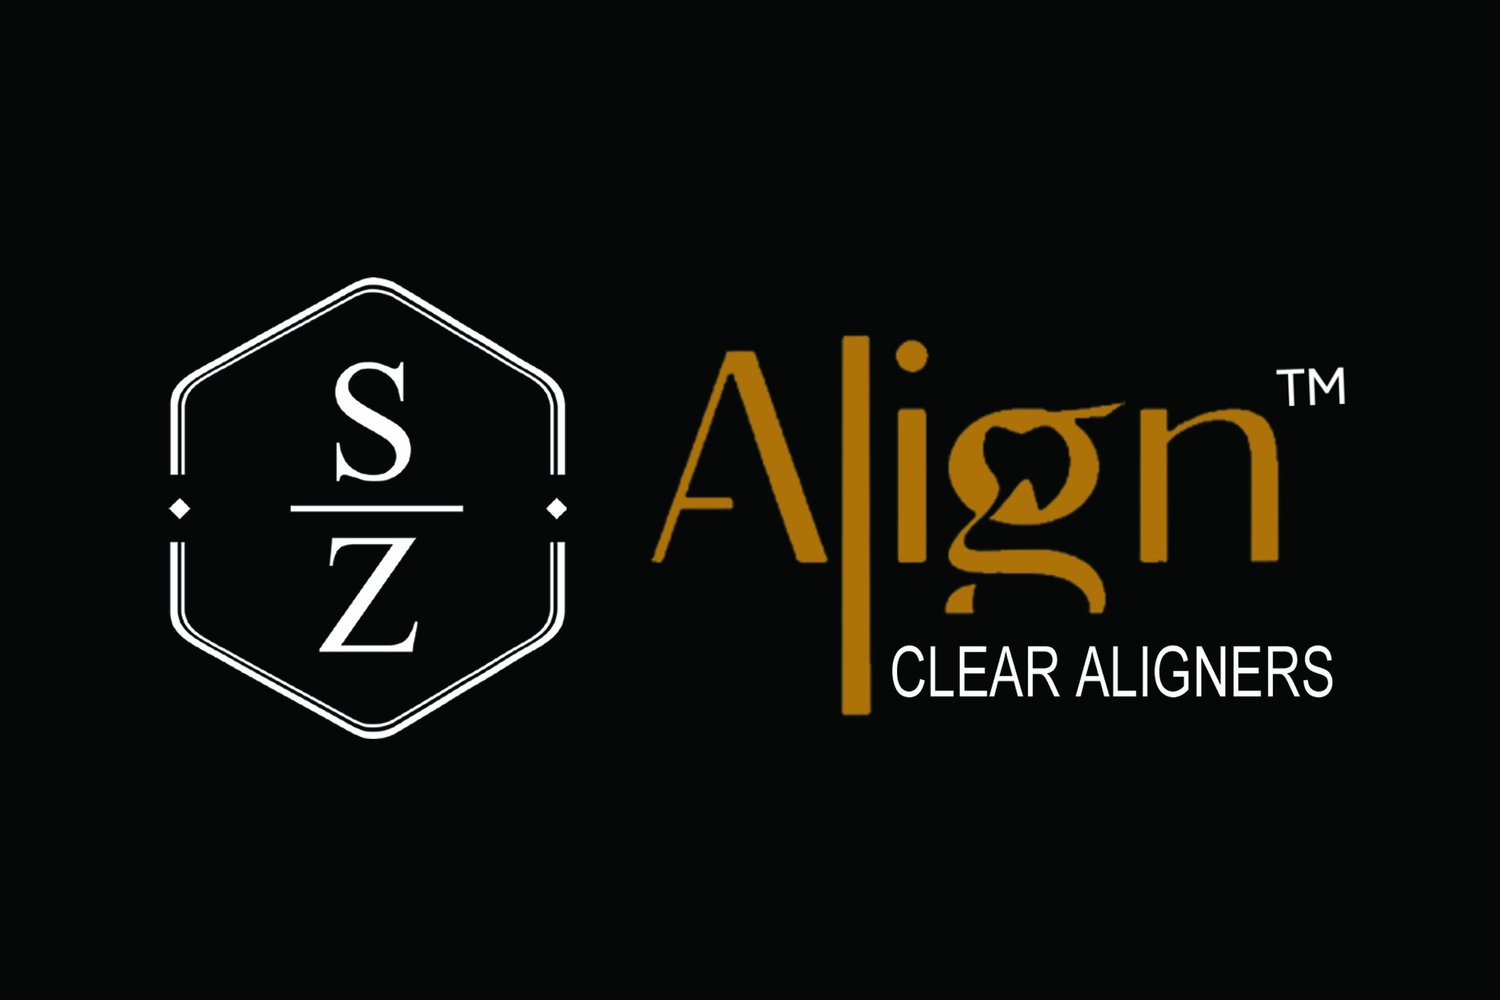 SZalign Clear Aligners